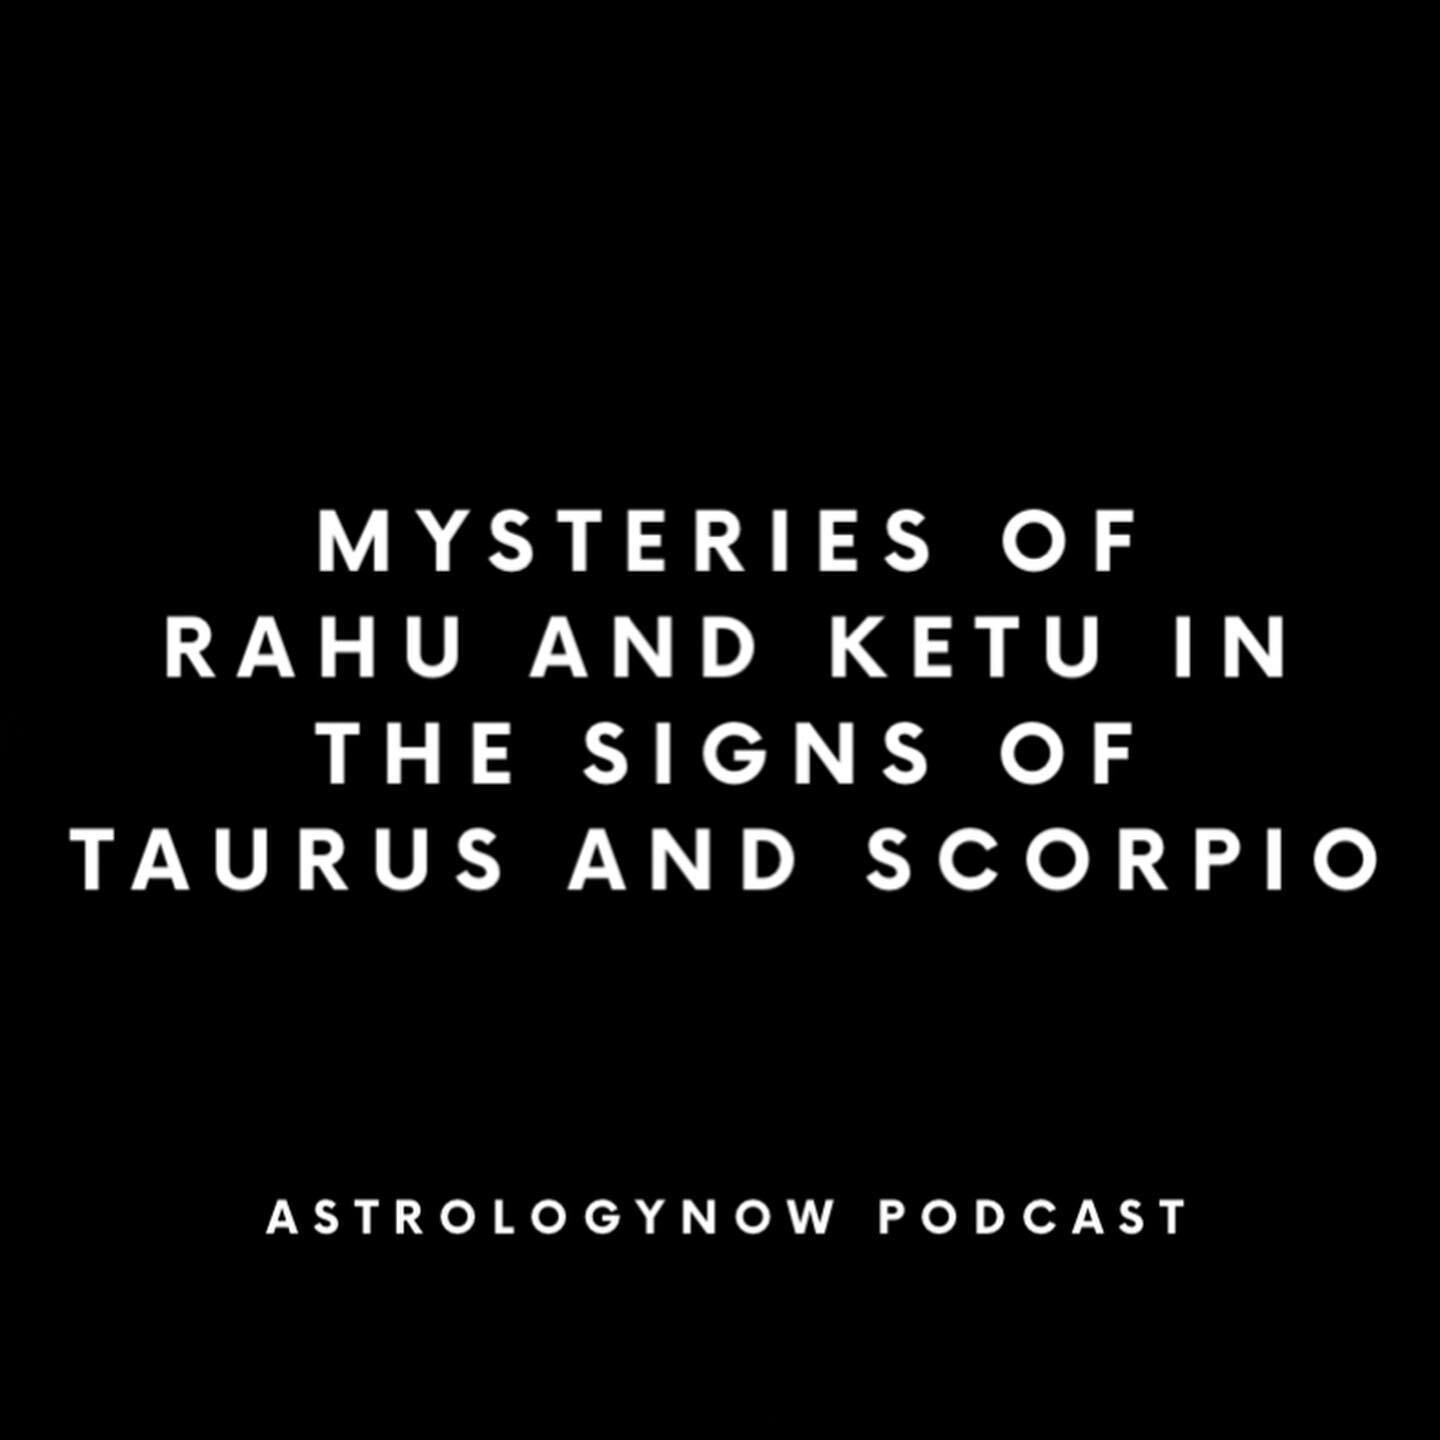 Ketu is currently in the sign of Scorpio and Rahu is in the sign of Taurus.

I&rsquo;ve recently posted about how these signs pertain to women specifically - and it&rsquo;s also difficult to ignore the obviously correlation to the nodes, these signs,